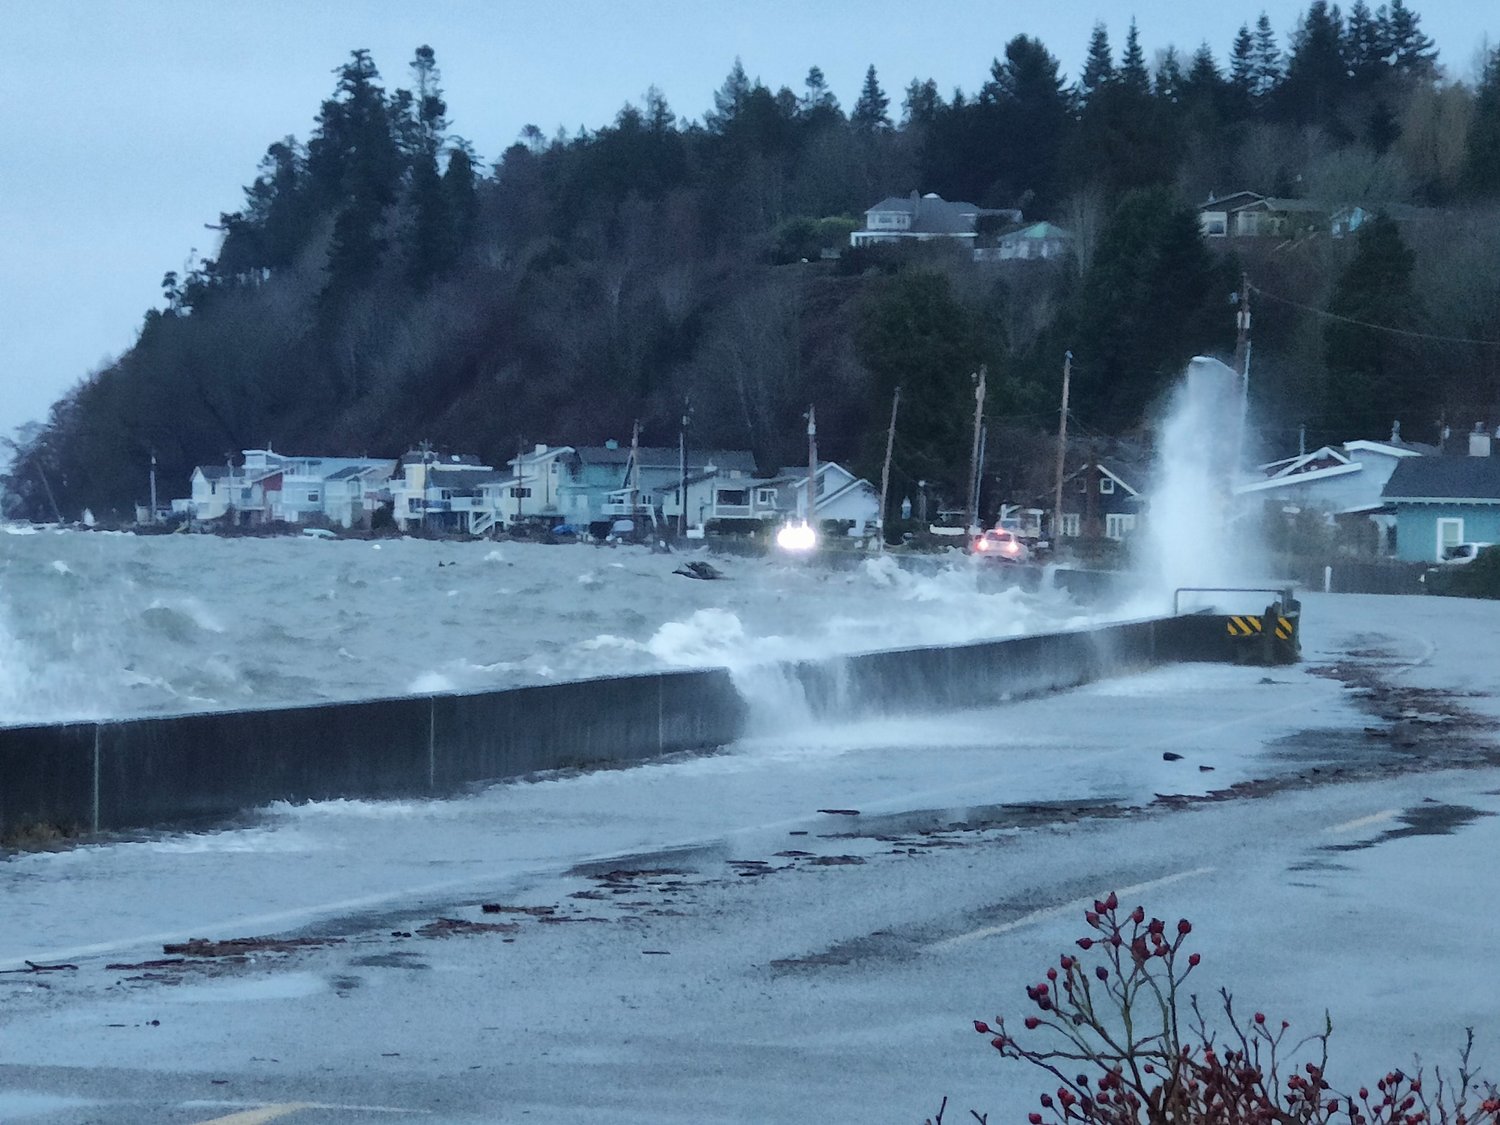 Waves, water and debris topping the Bayview Drive seawall.